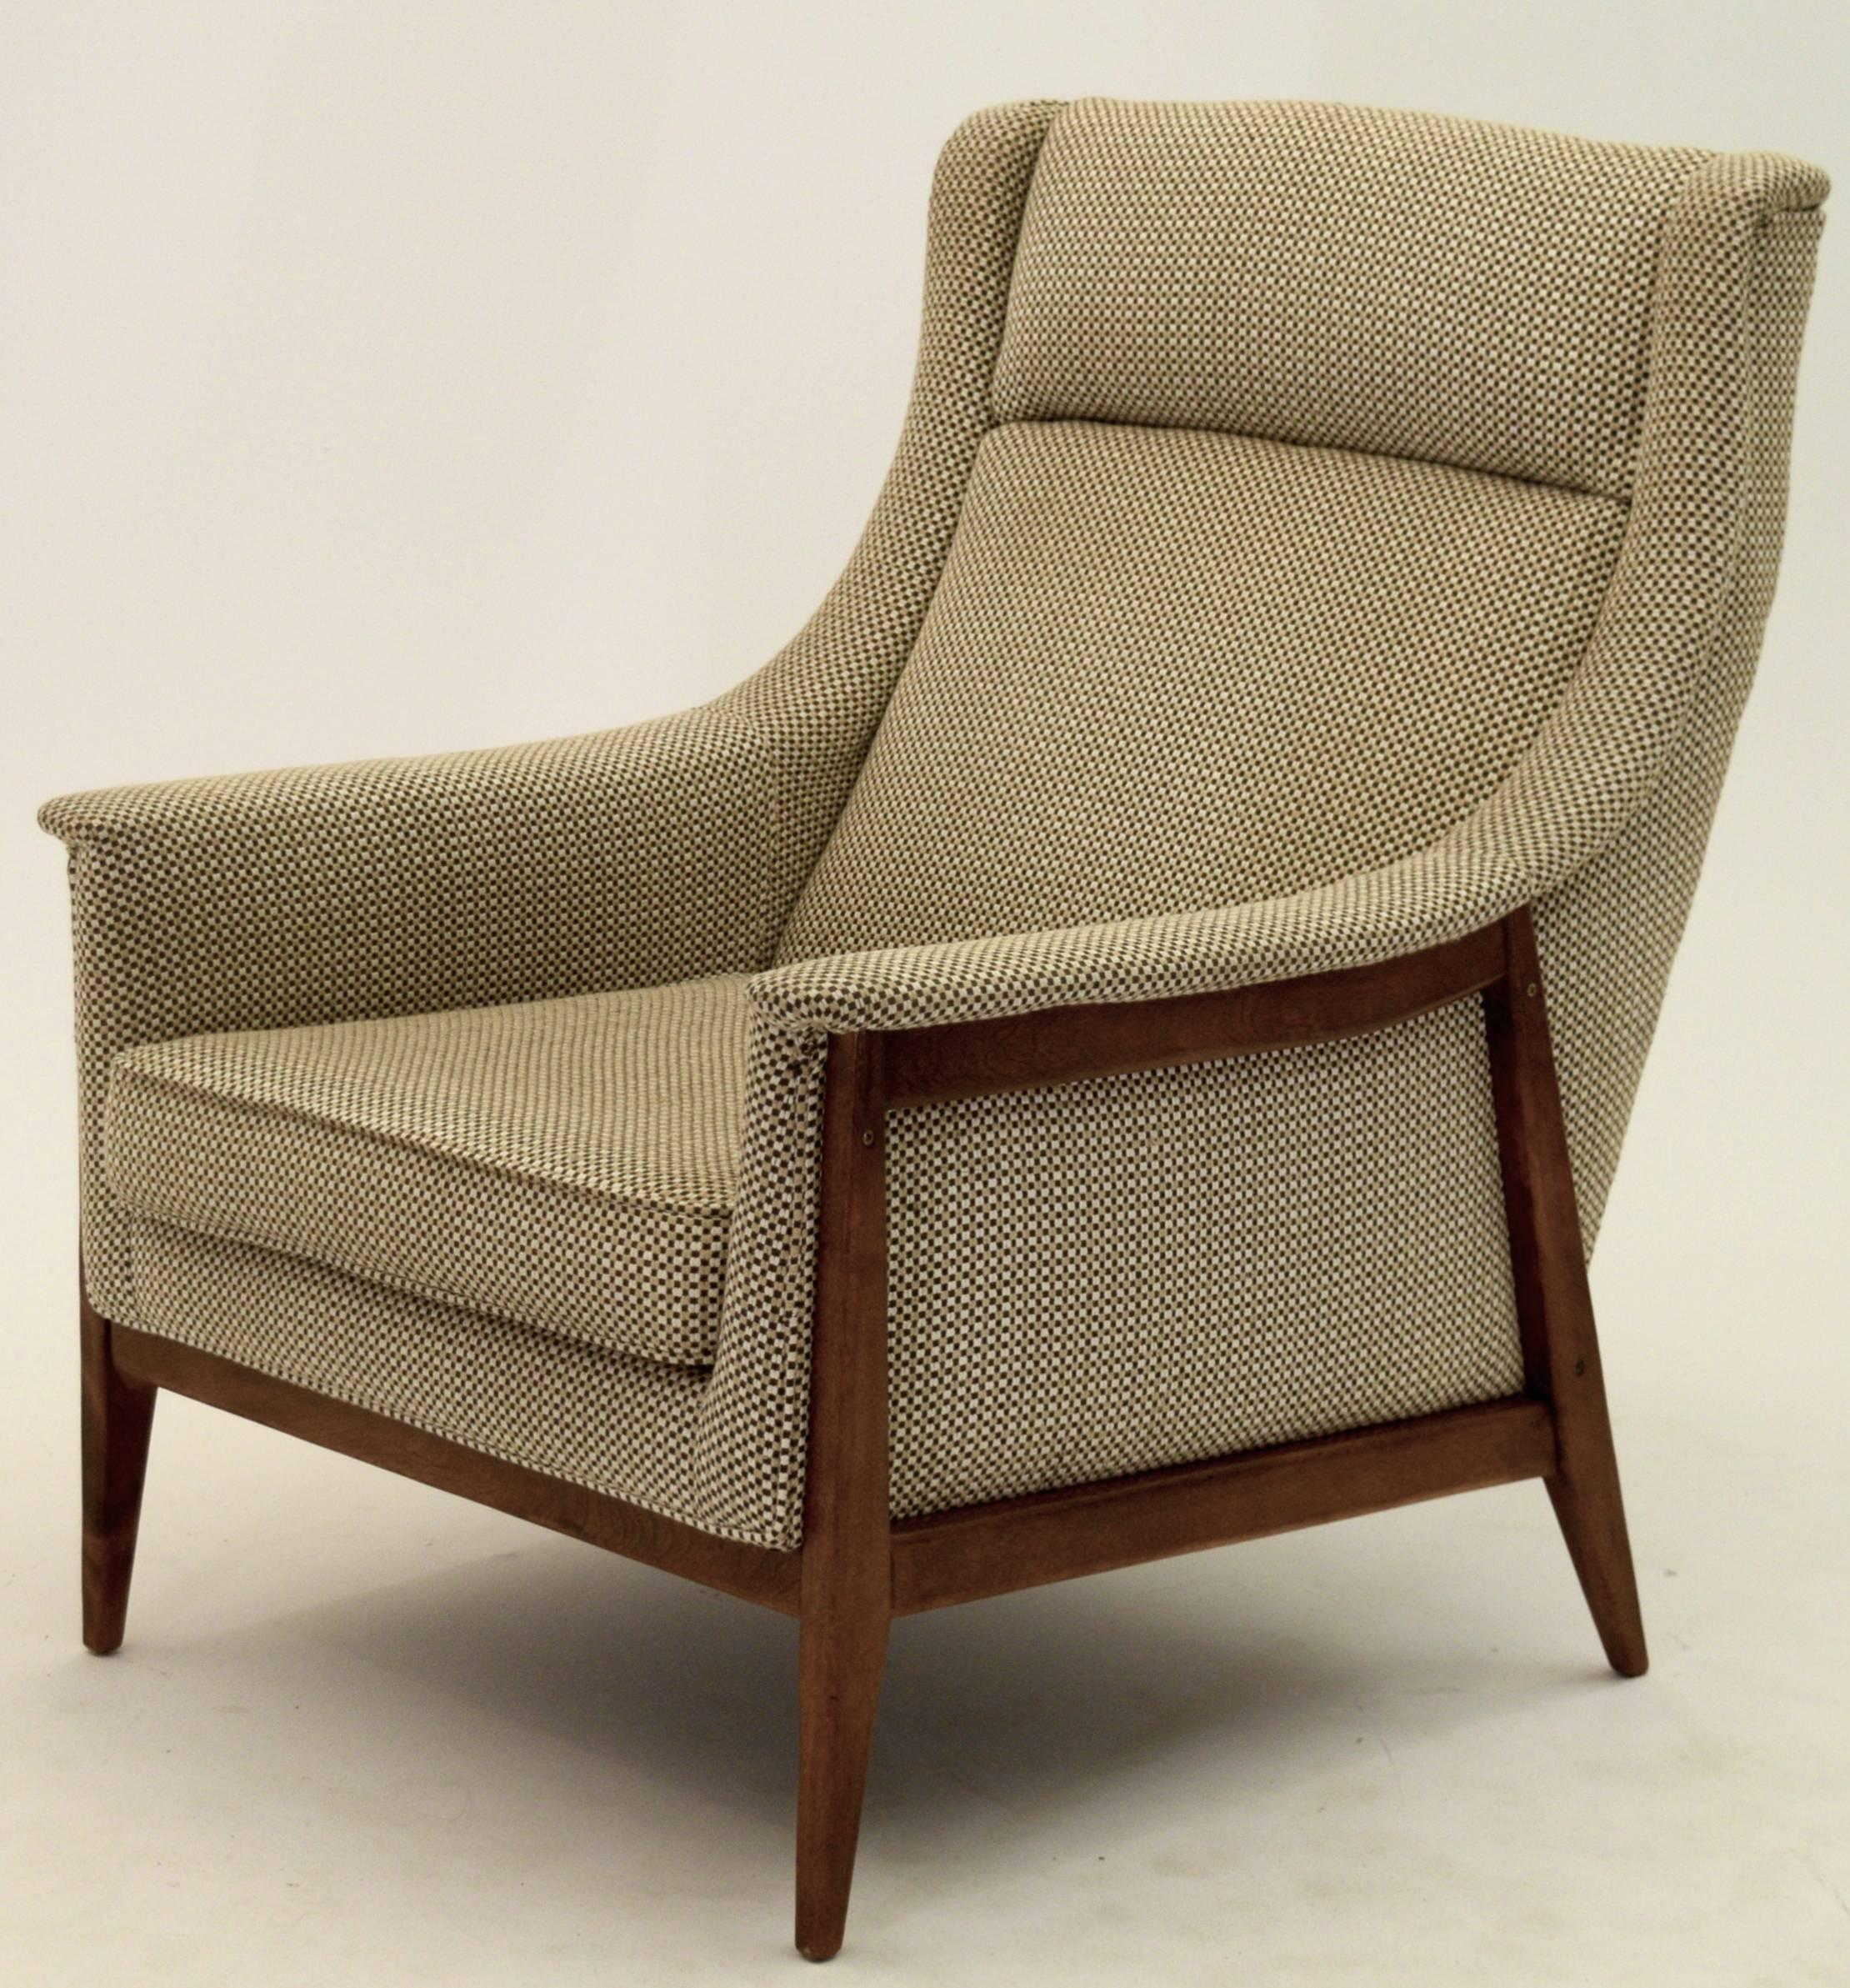 A very large lounge chair and ottoman by Selig, from their 